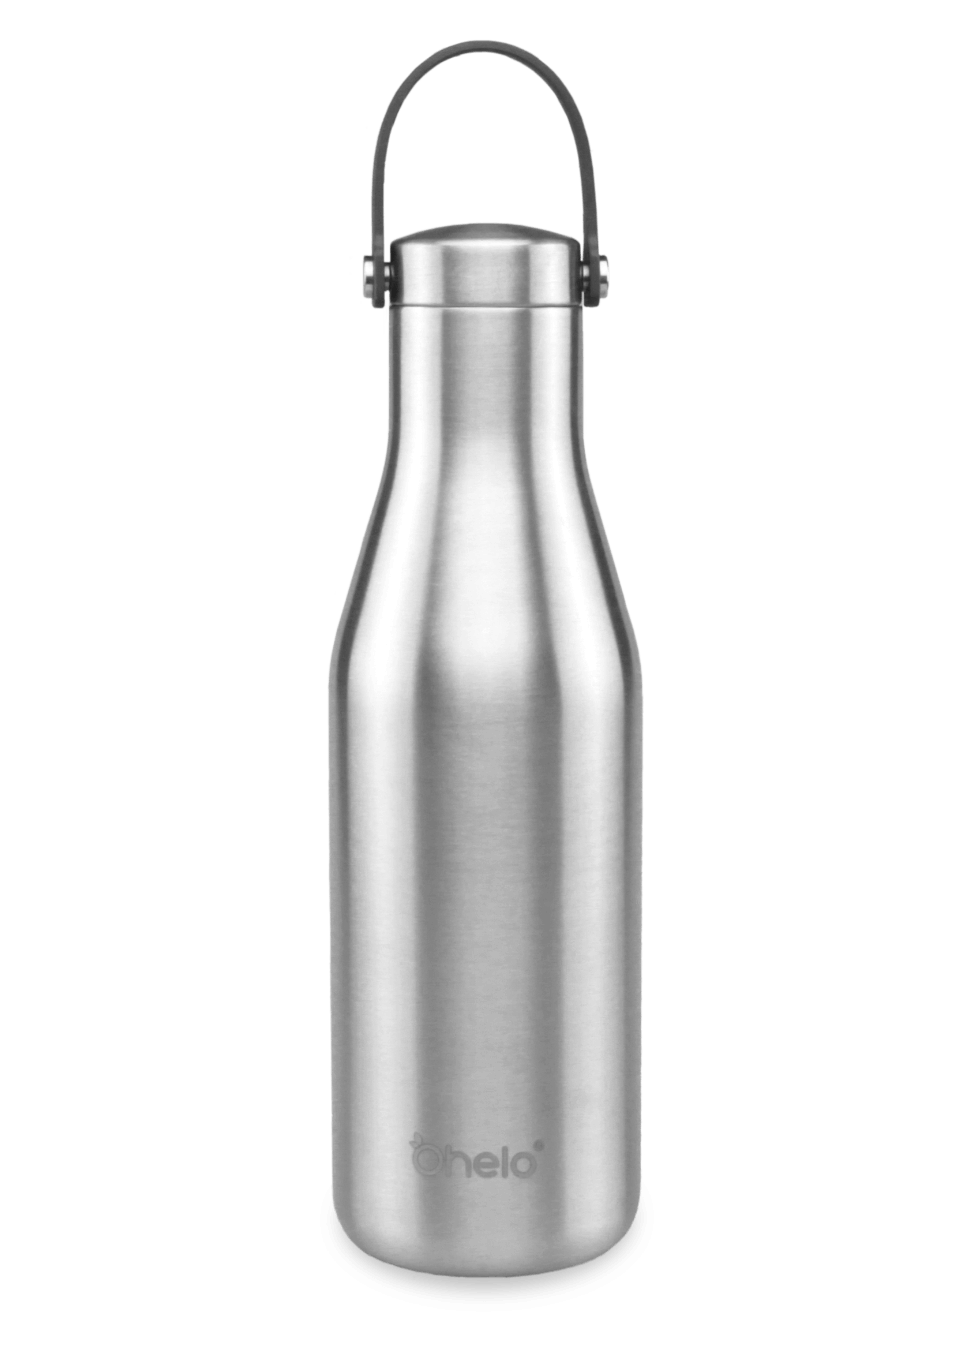 Ohelo Lead Free Water Bottle Steel, Vacuum Insulated